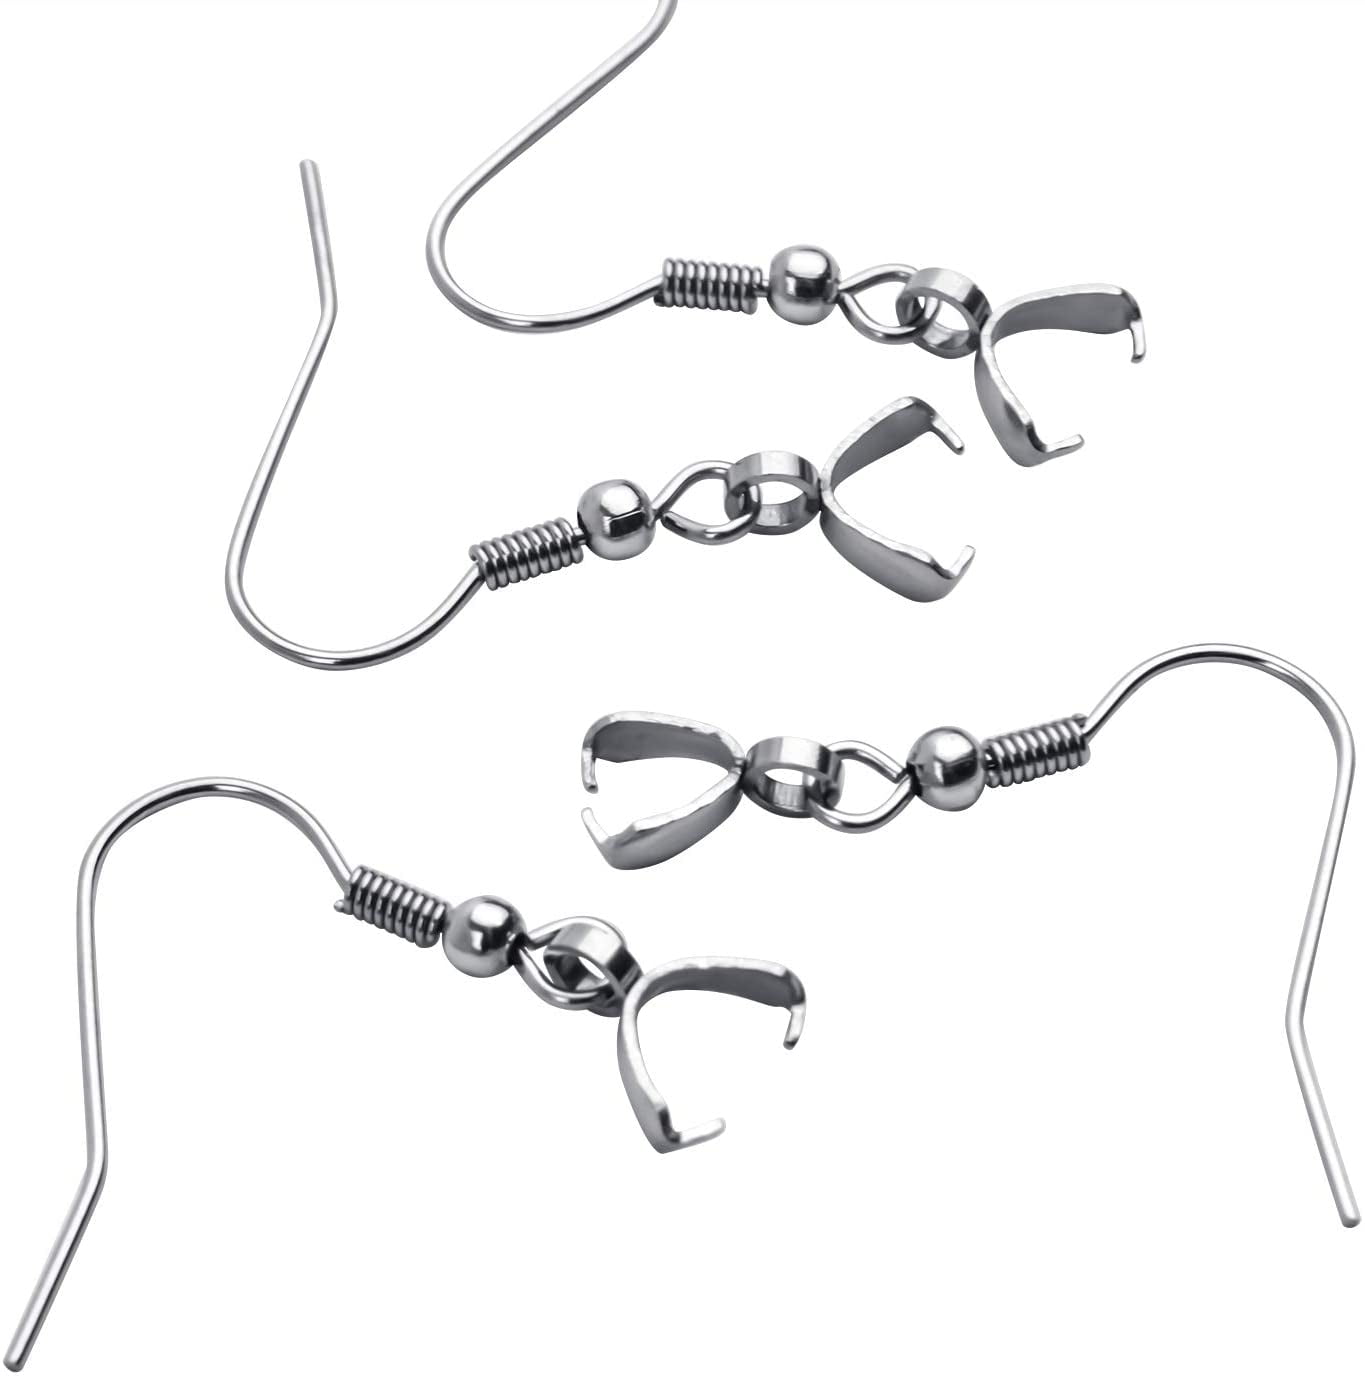 High Quality Stainless Steel Earring Findings With Clasps And Airflow Hooks  Never Fading DIY Jewelry Making Accessories By Dhgarden Otzuj From  Dh_garden, $4.27